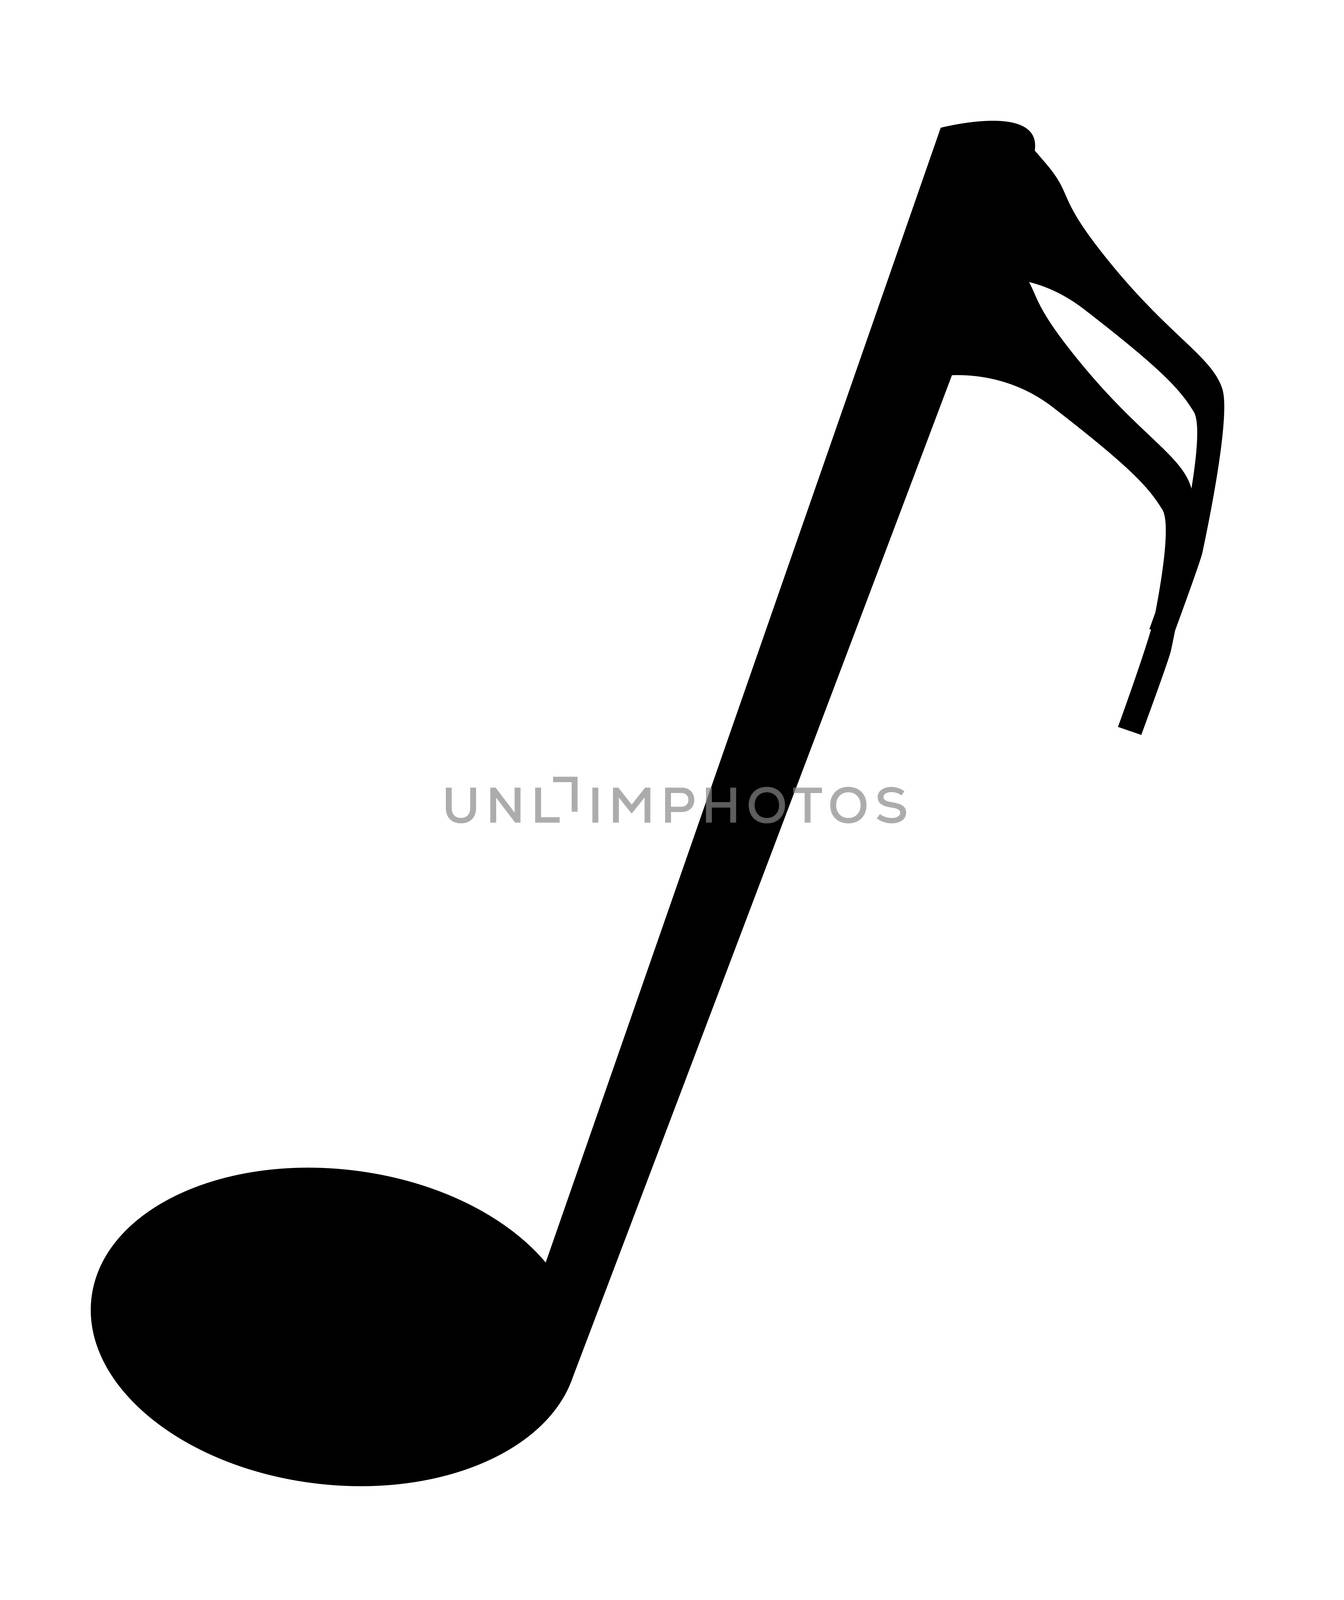 A sixteenth black musical note isolated over a white background